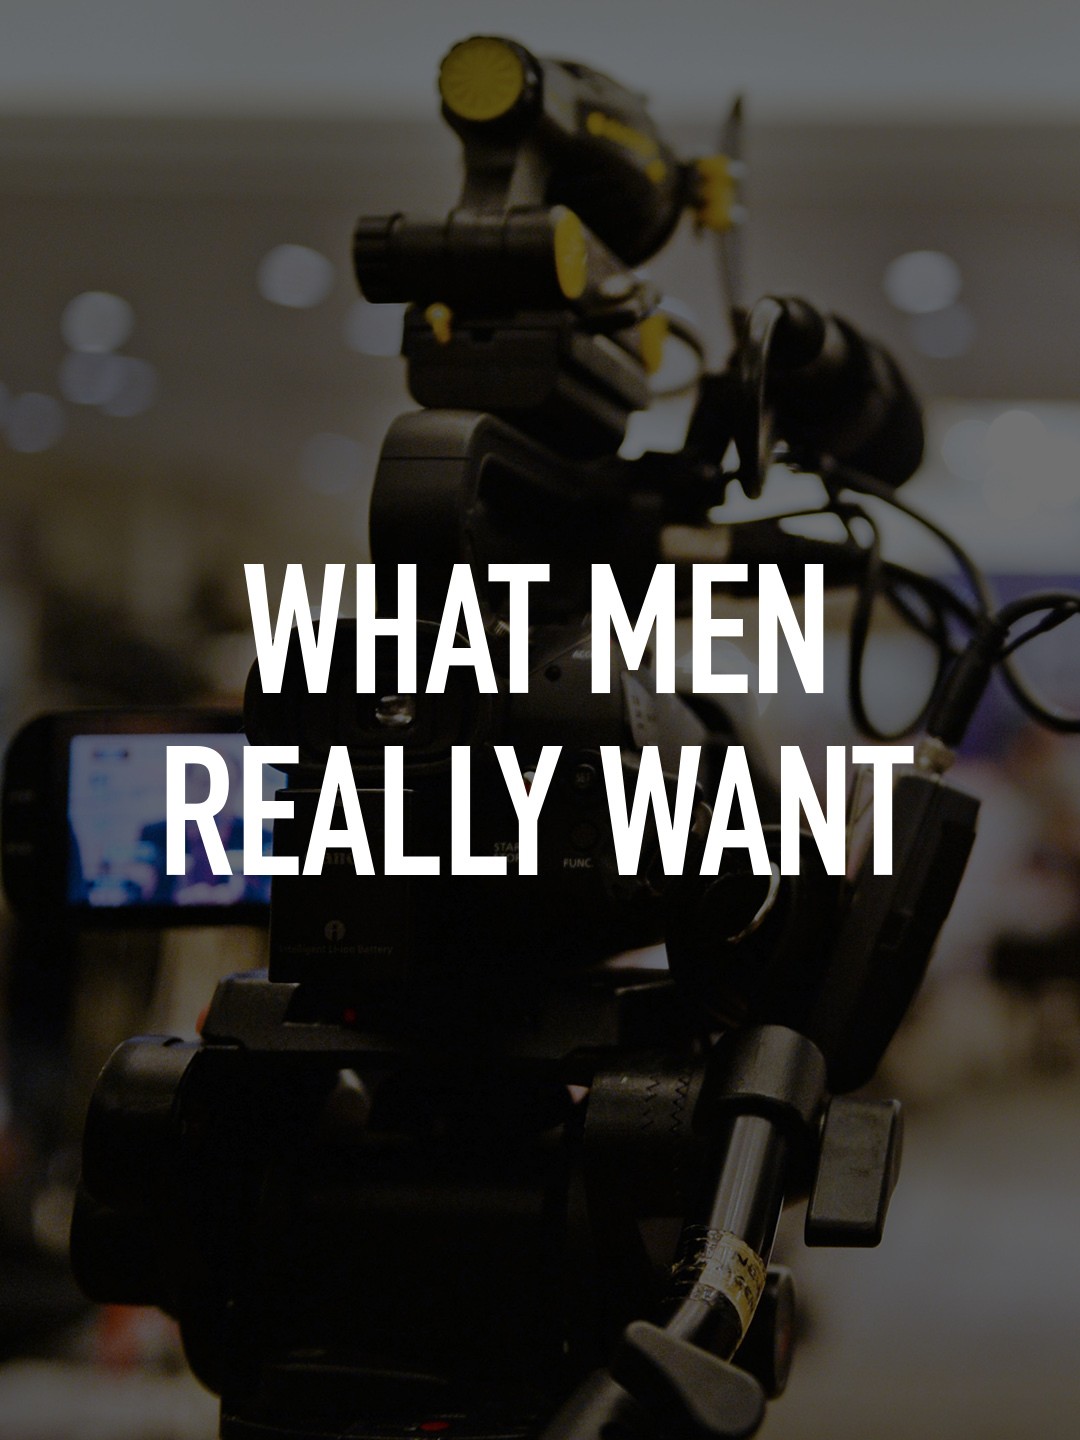 What Men Want - Rotten Tomatoes